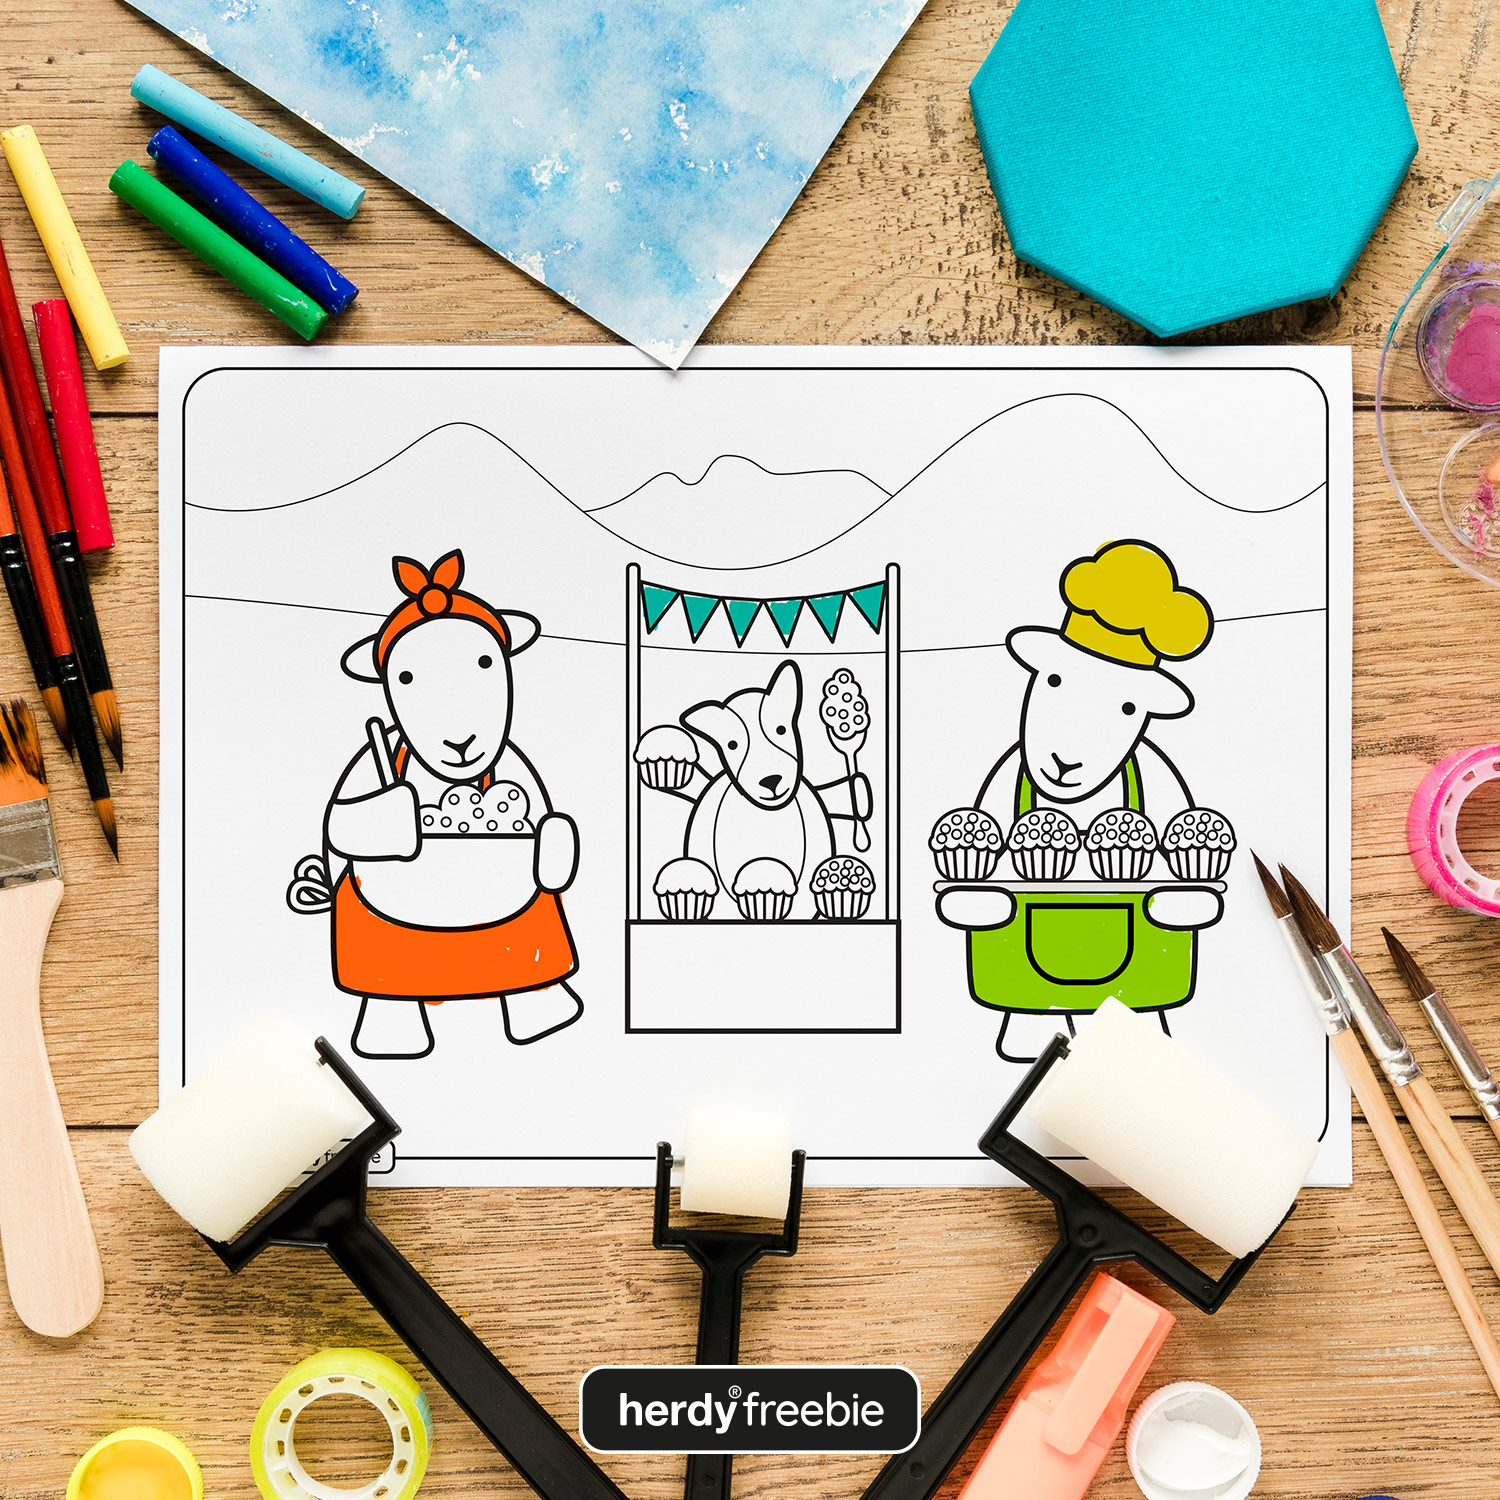 Herdy free coloring in download: image shows Herdy and Sheppy Baking